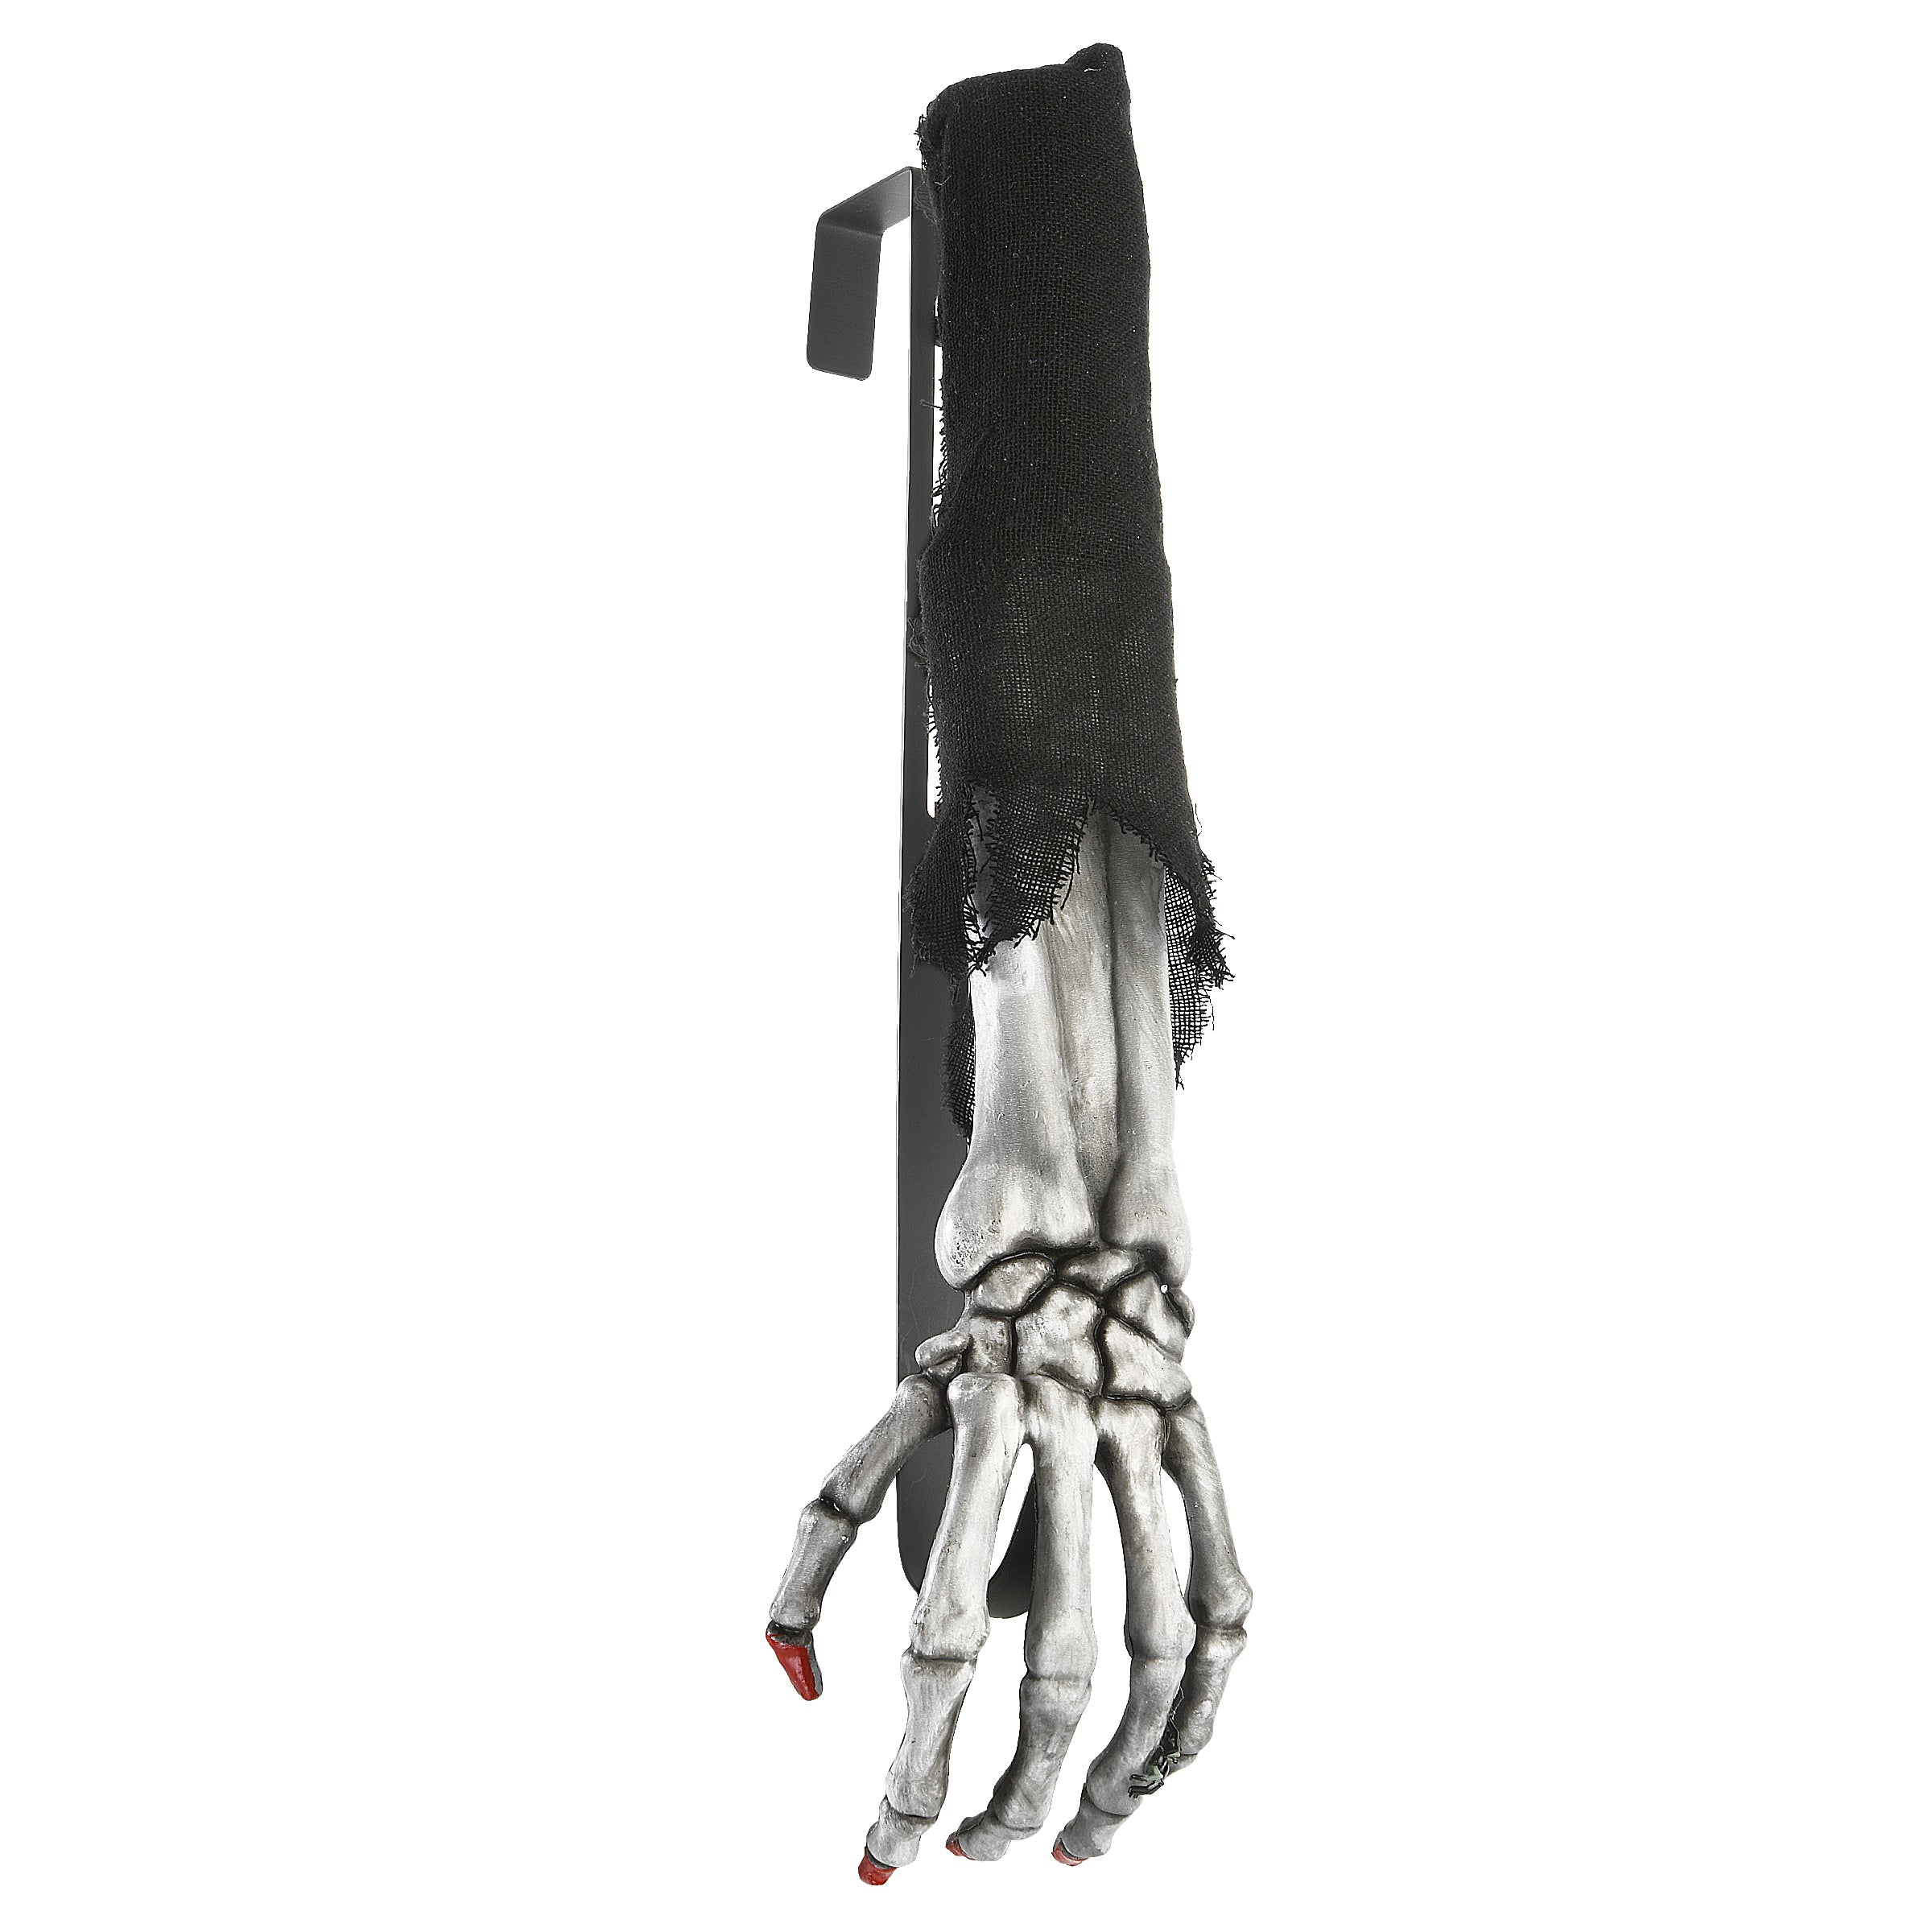 Halloween Skeleton Arm and Hand Wreath Hanger, 18 Inches